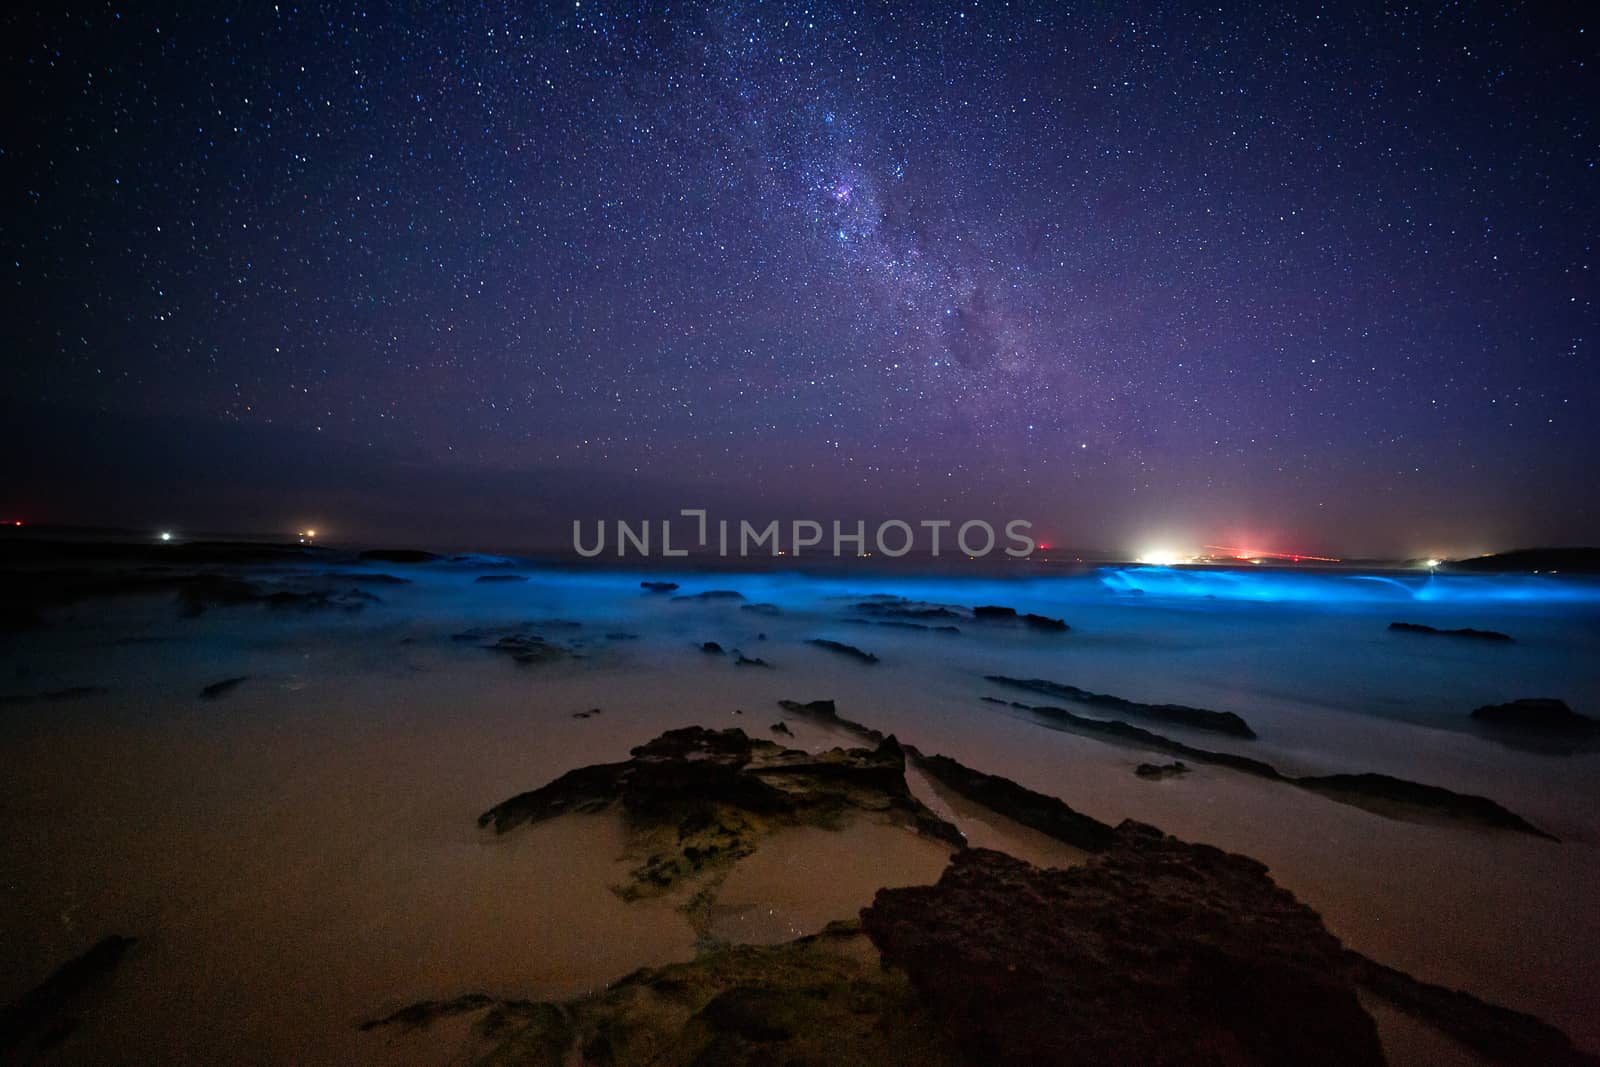 Bioluninescence and stars in Australia by lovleah